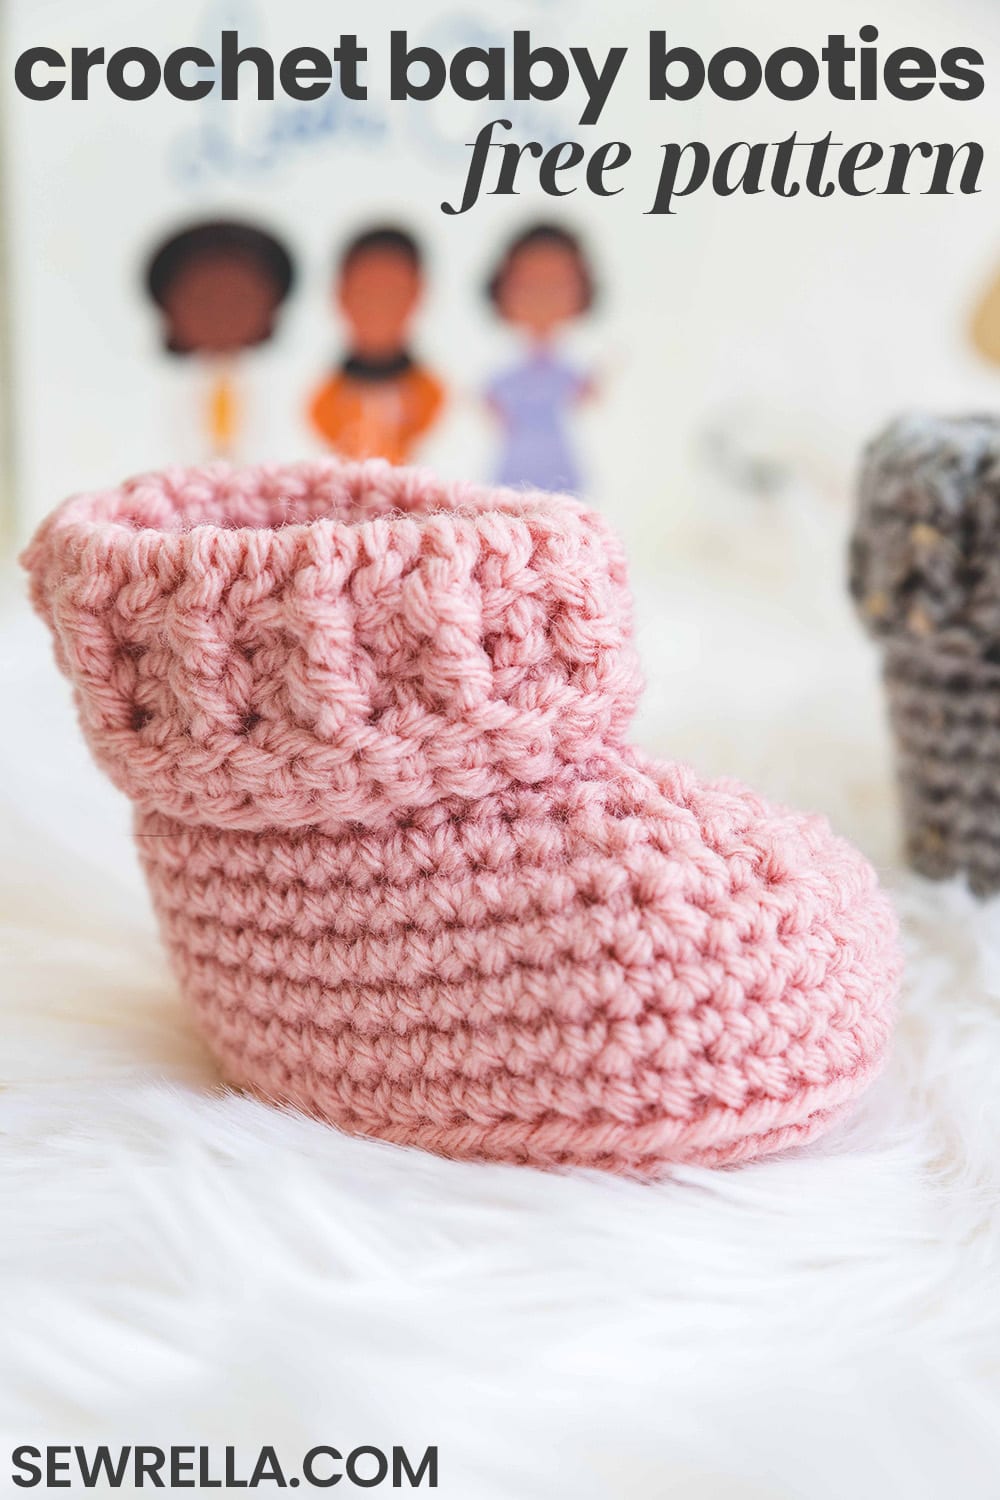 The Parker Crochet Baby Booties Sewrella,How To Make A Diaper Cake Without Rolling